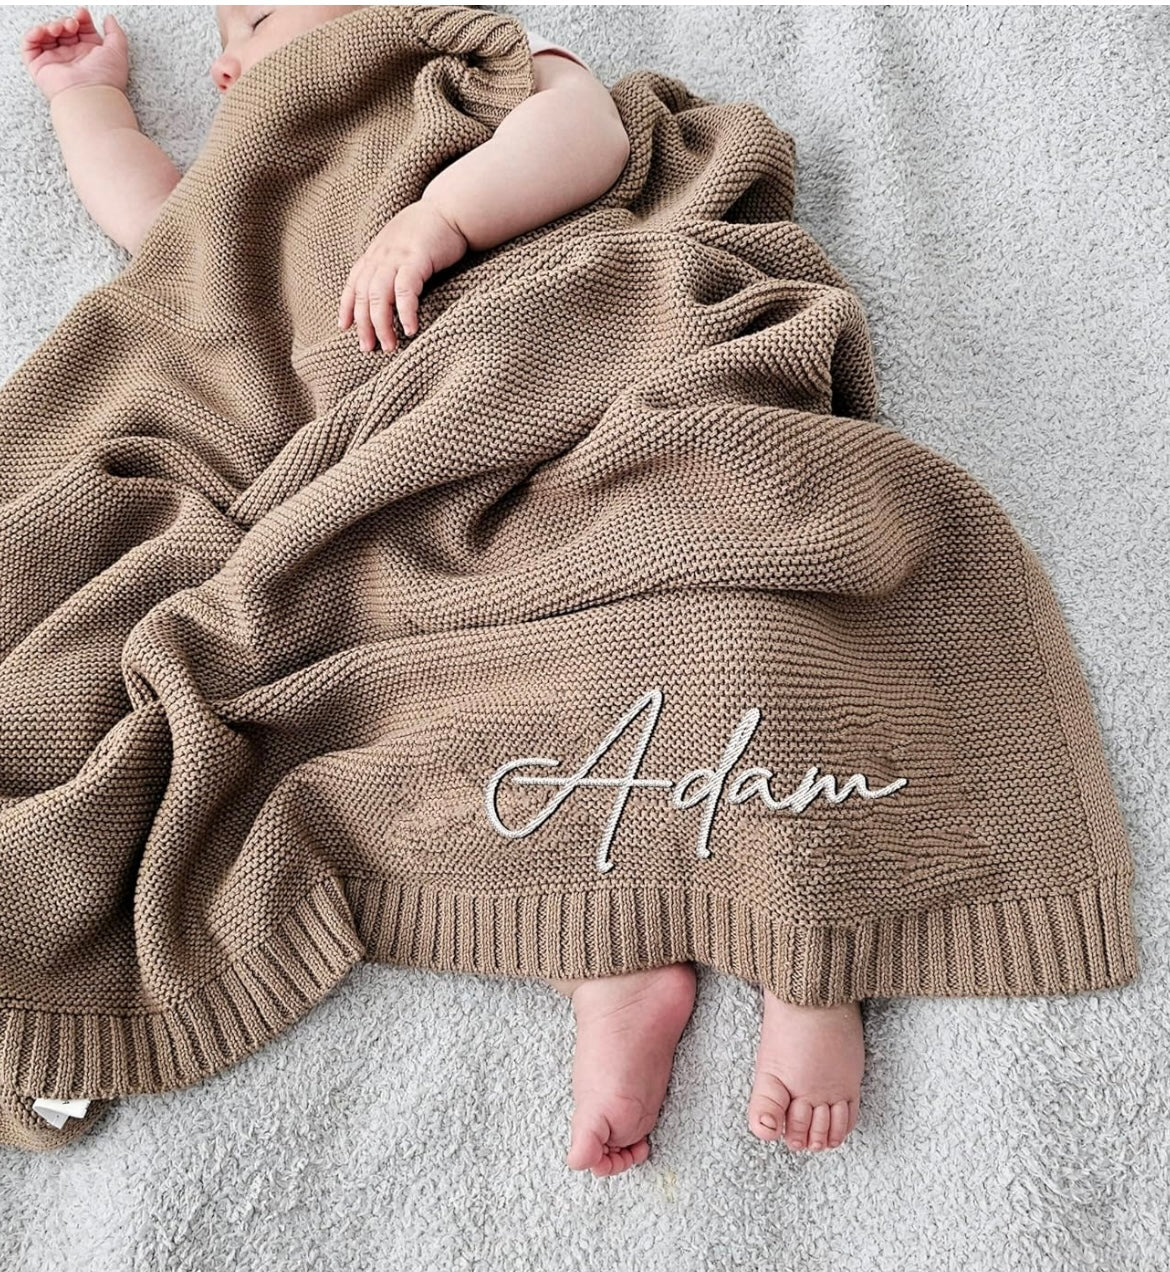 Knit Baby Blanket Personalized Extra Charge